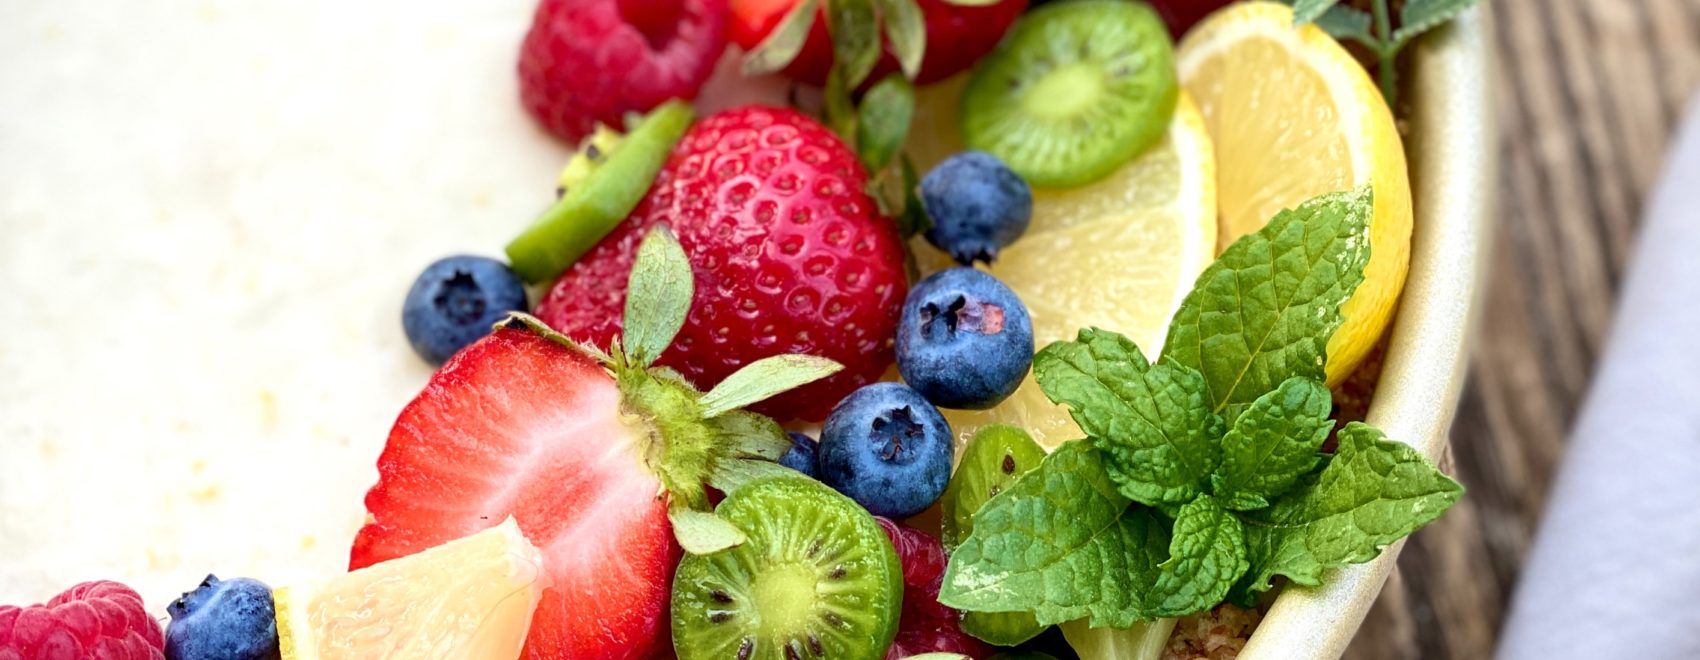 Close up image of fresh fruits cut up in a bowl. Are you struggling with hormone imbalance or weight gain? Our holistic doctor can help you restore you health with functional medicine in Orland Park, IL 60448.